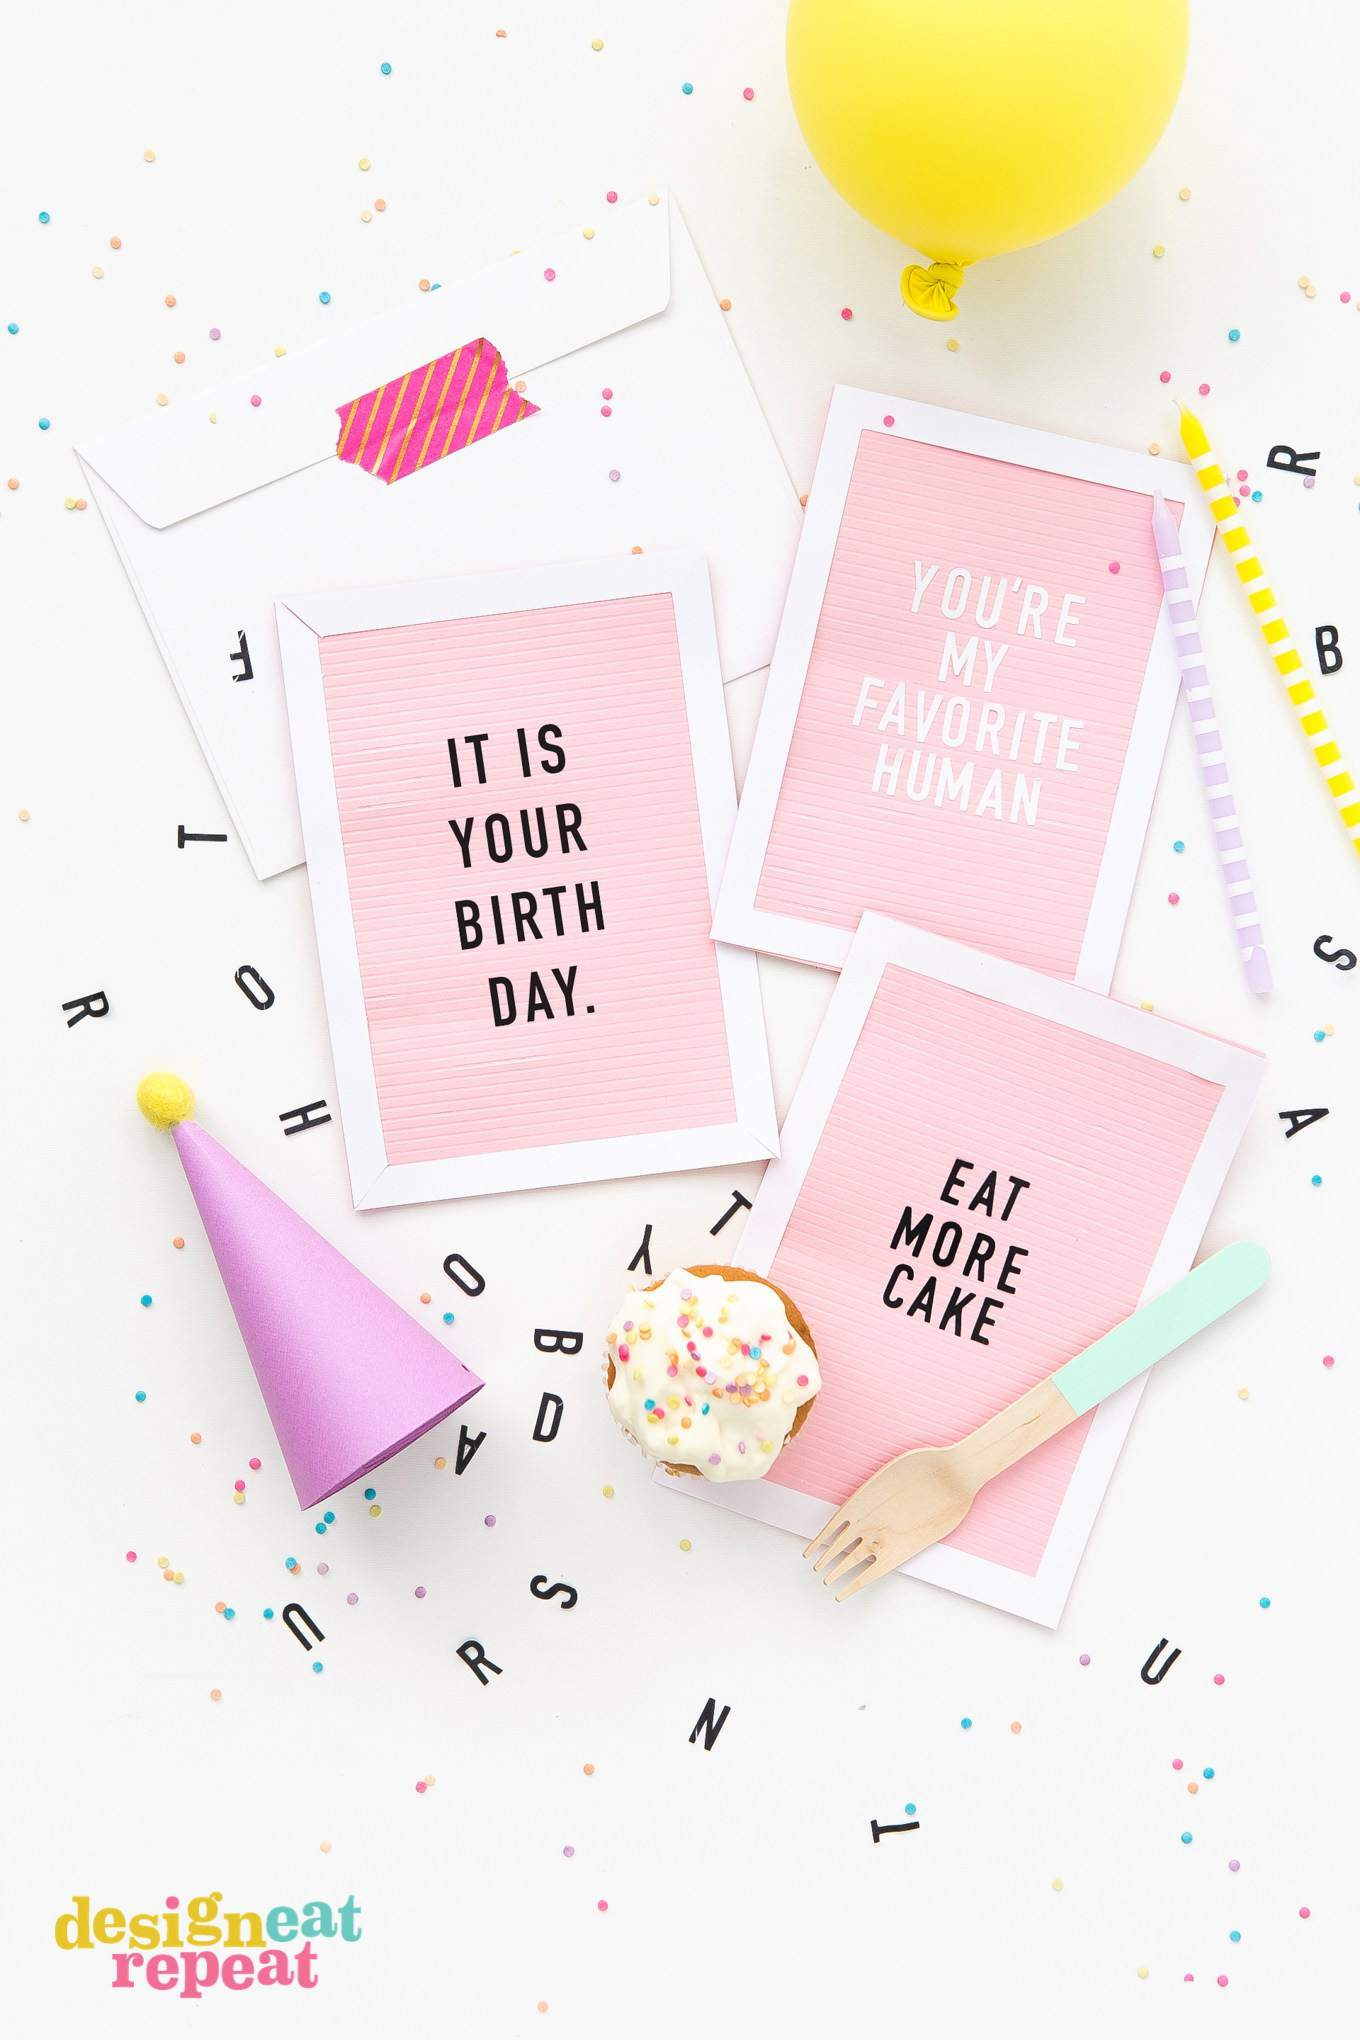 21St Birthday Card Making Ideas Get Inspiration From 25 Of The Best Diy Birthday Cards